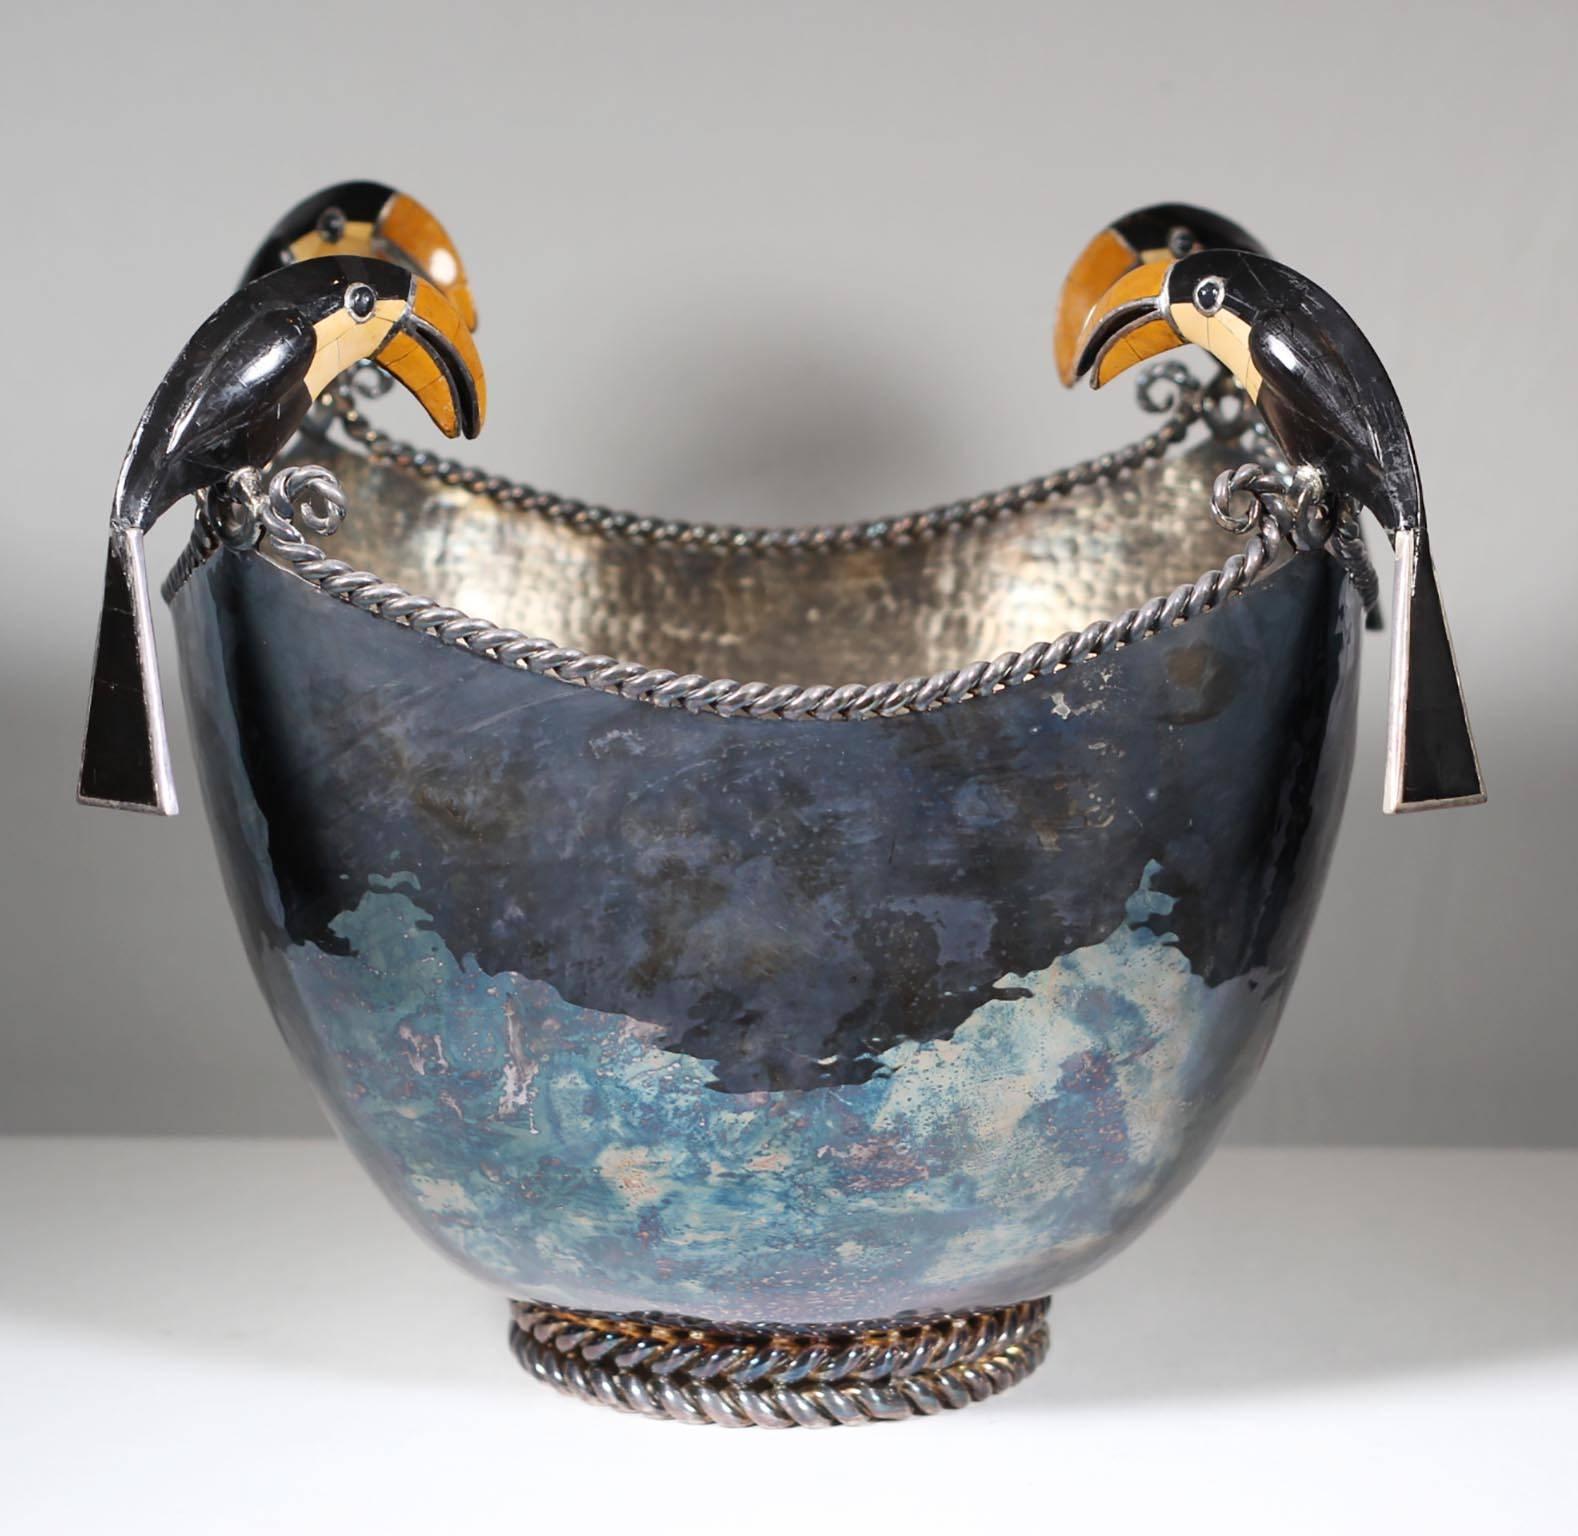 Enameled Emilia Castillo Silver Plated Mexican Toucan Pitcher and Punch Bowl